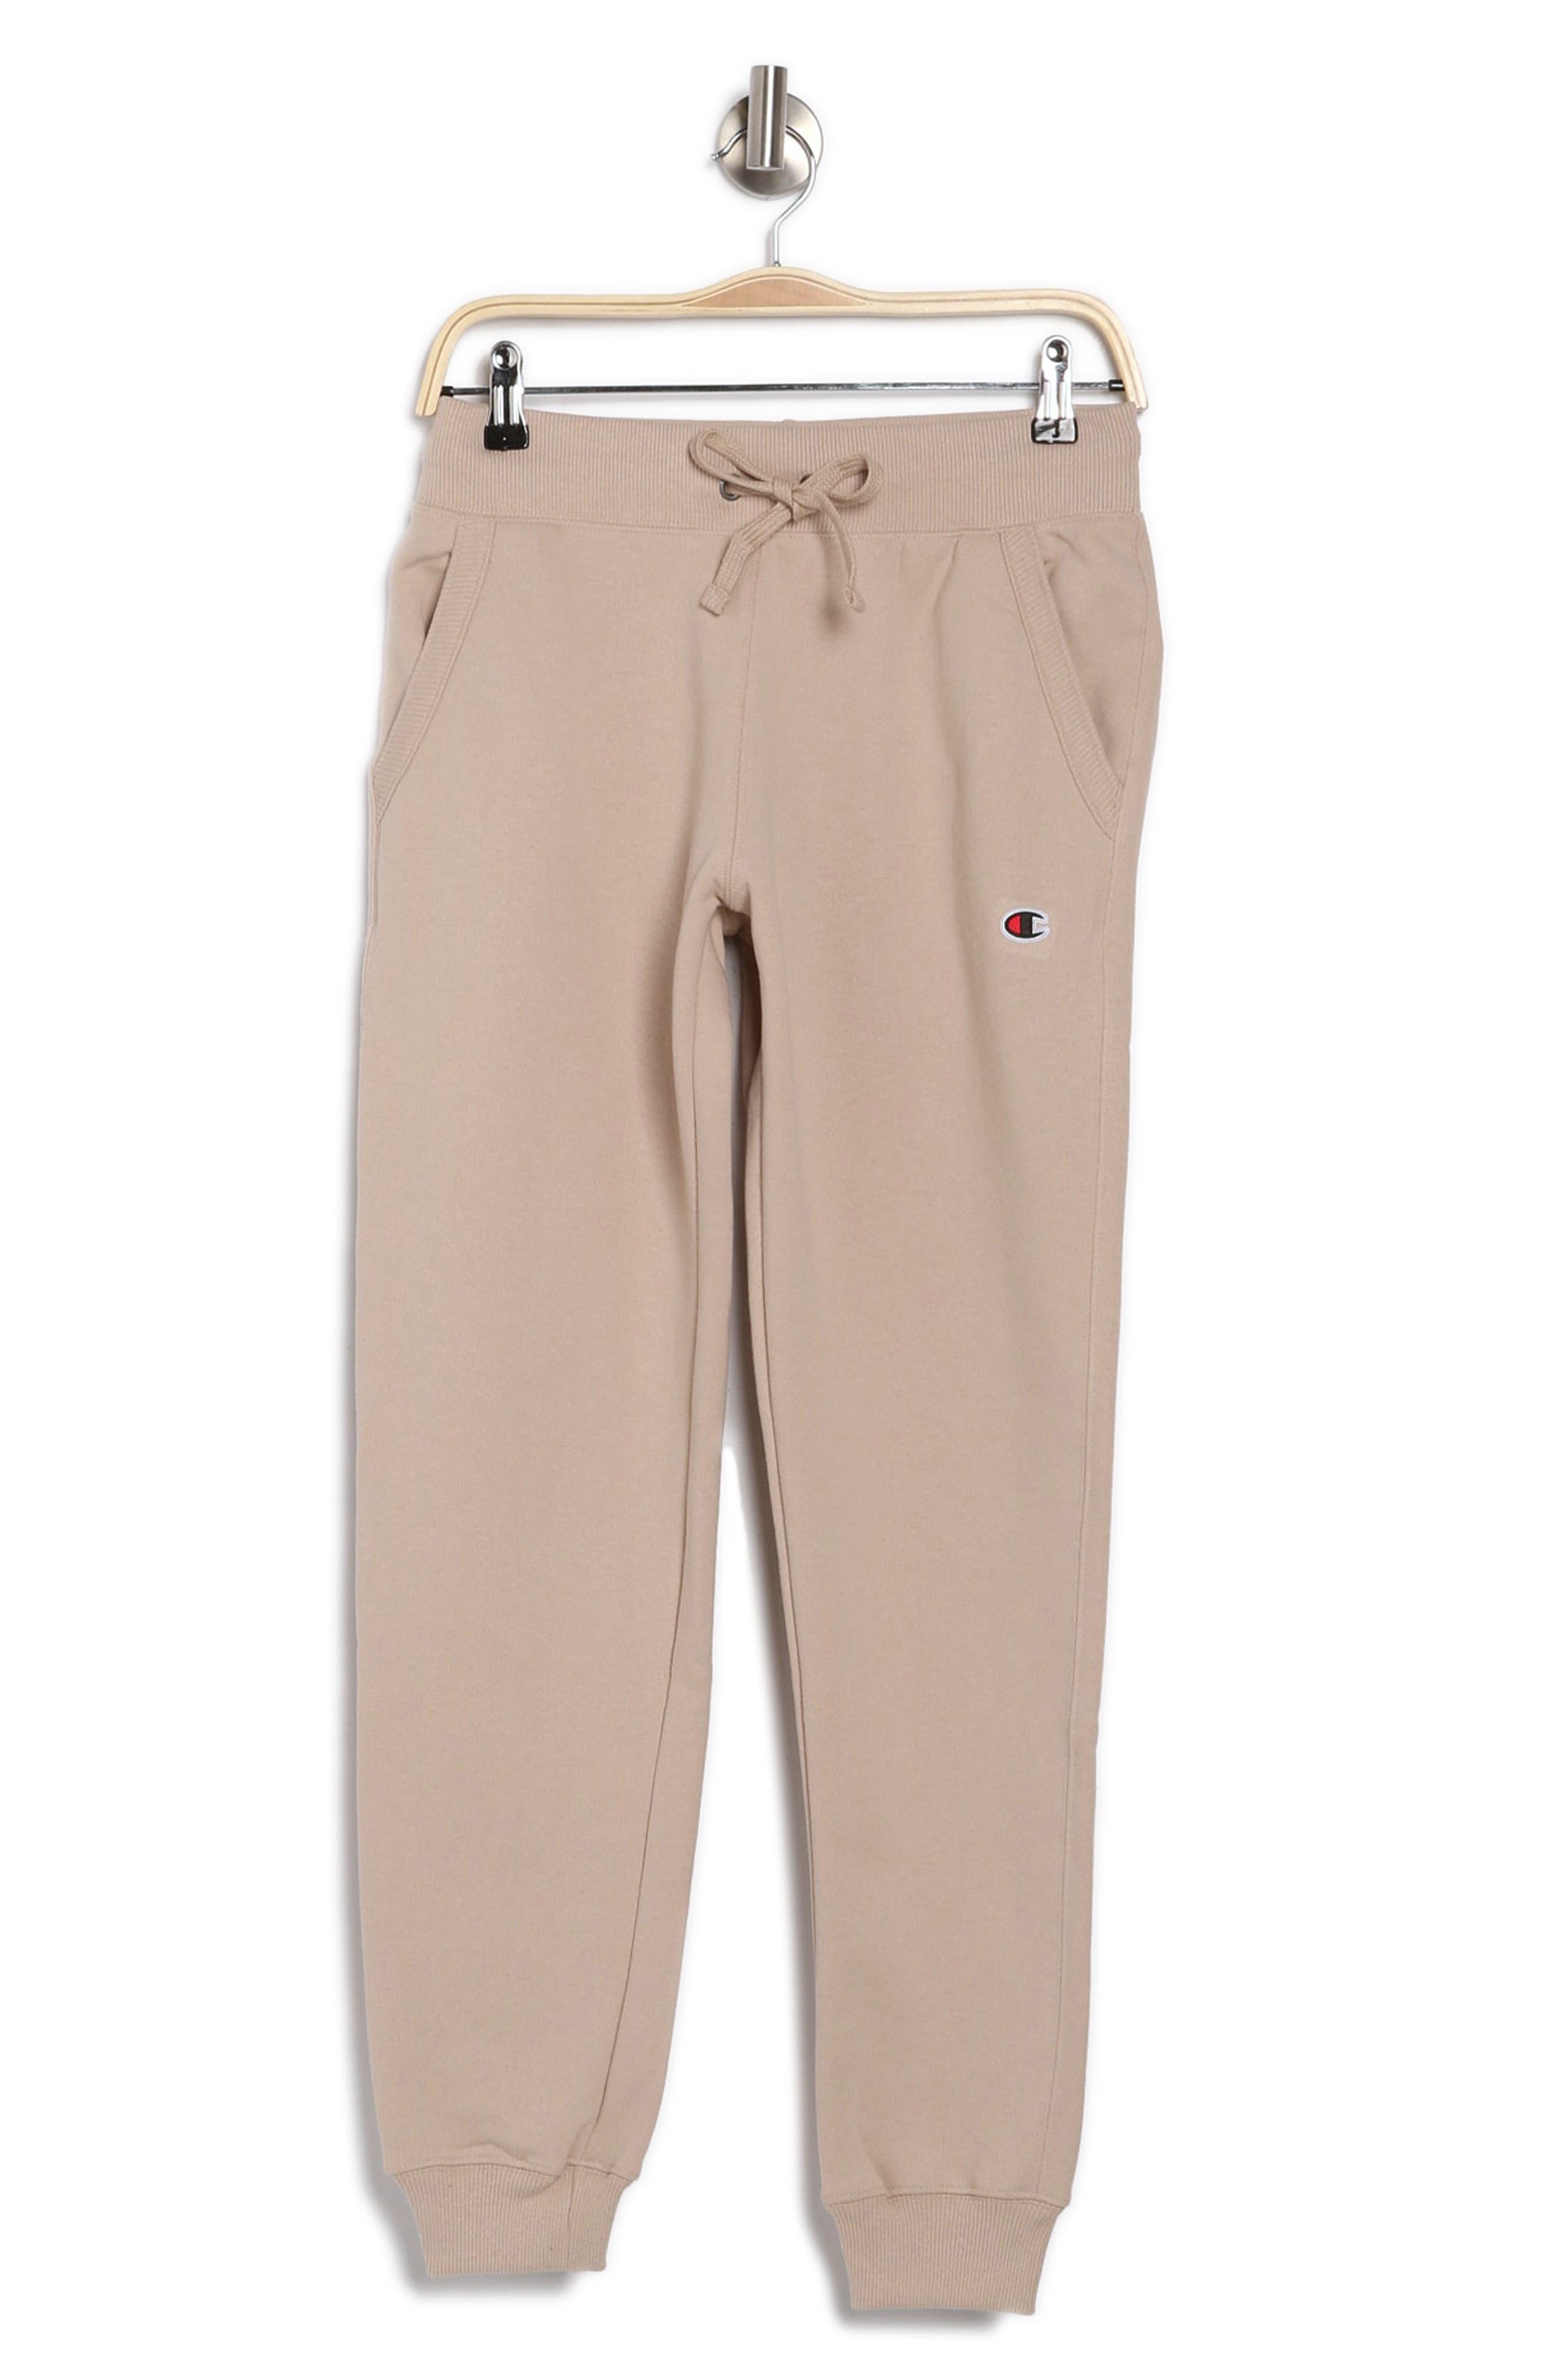 Champion Powerblend Fleece Joggers in Natural